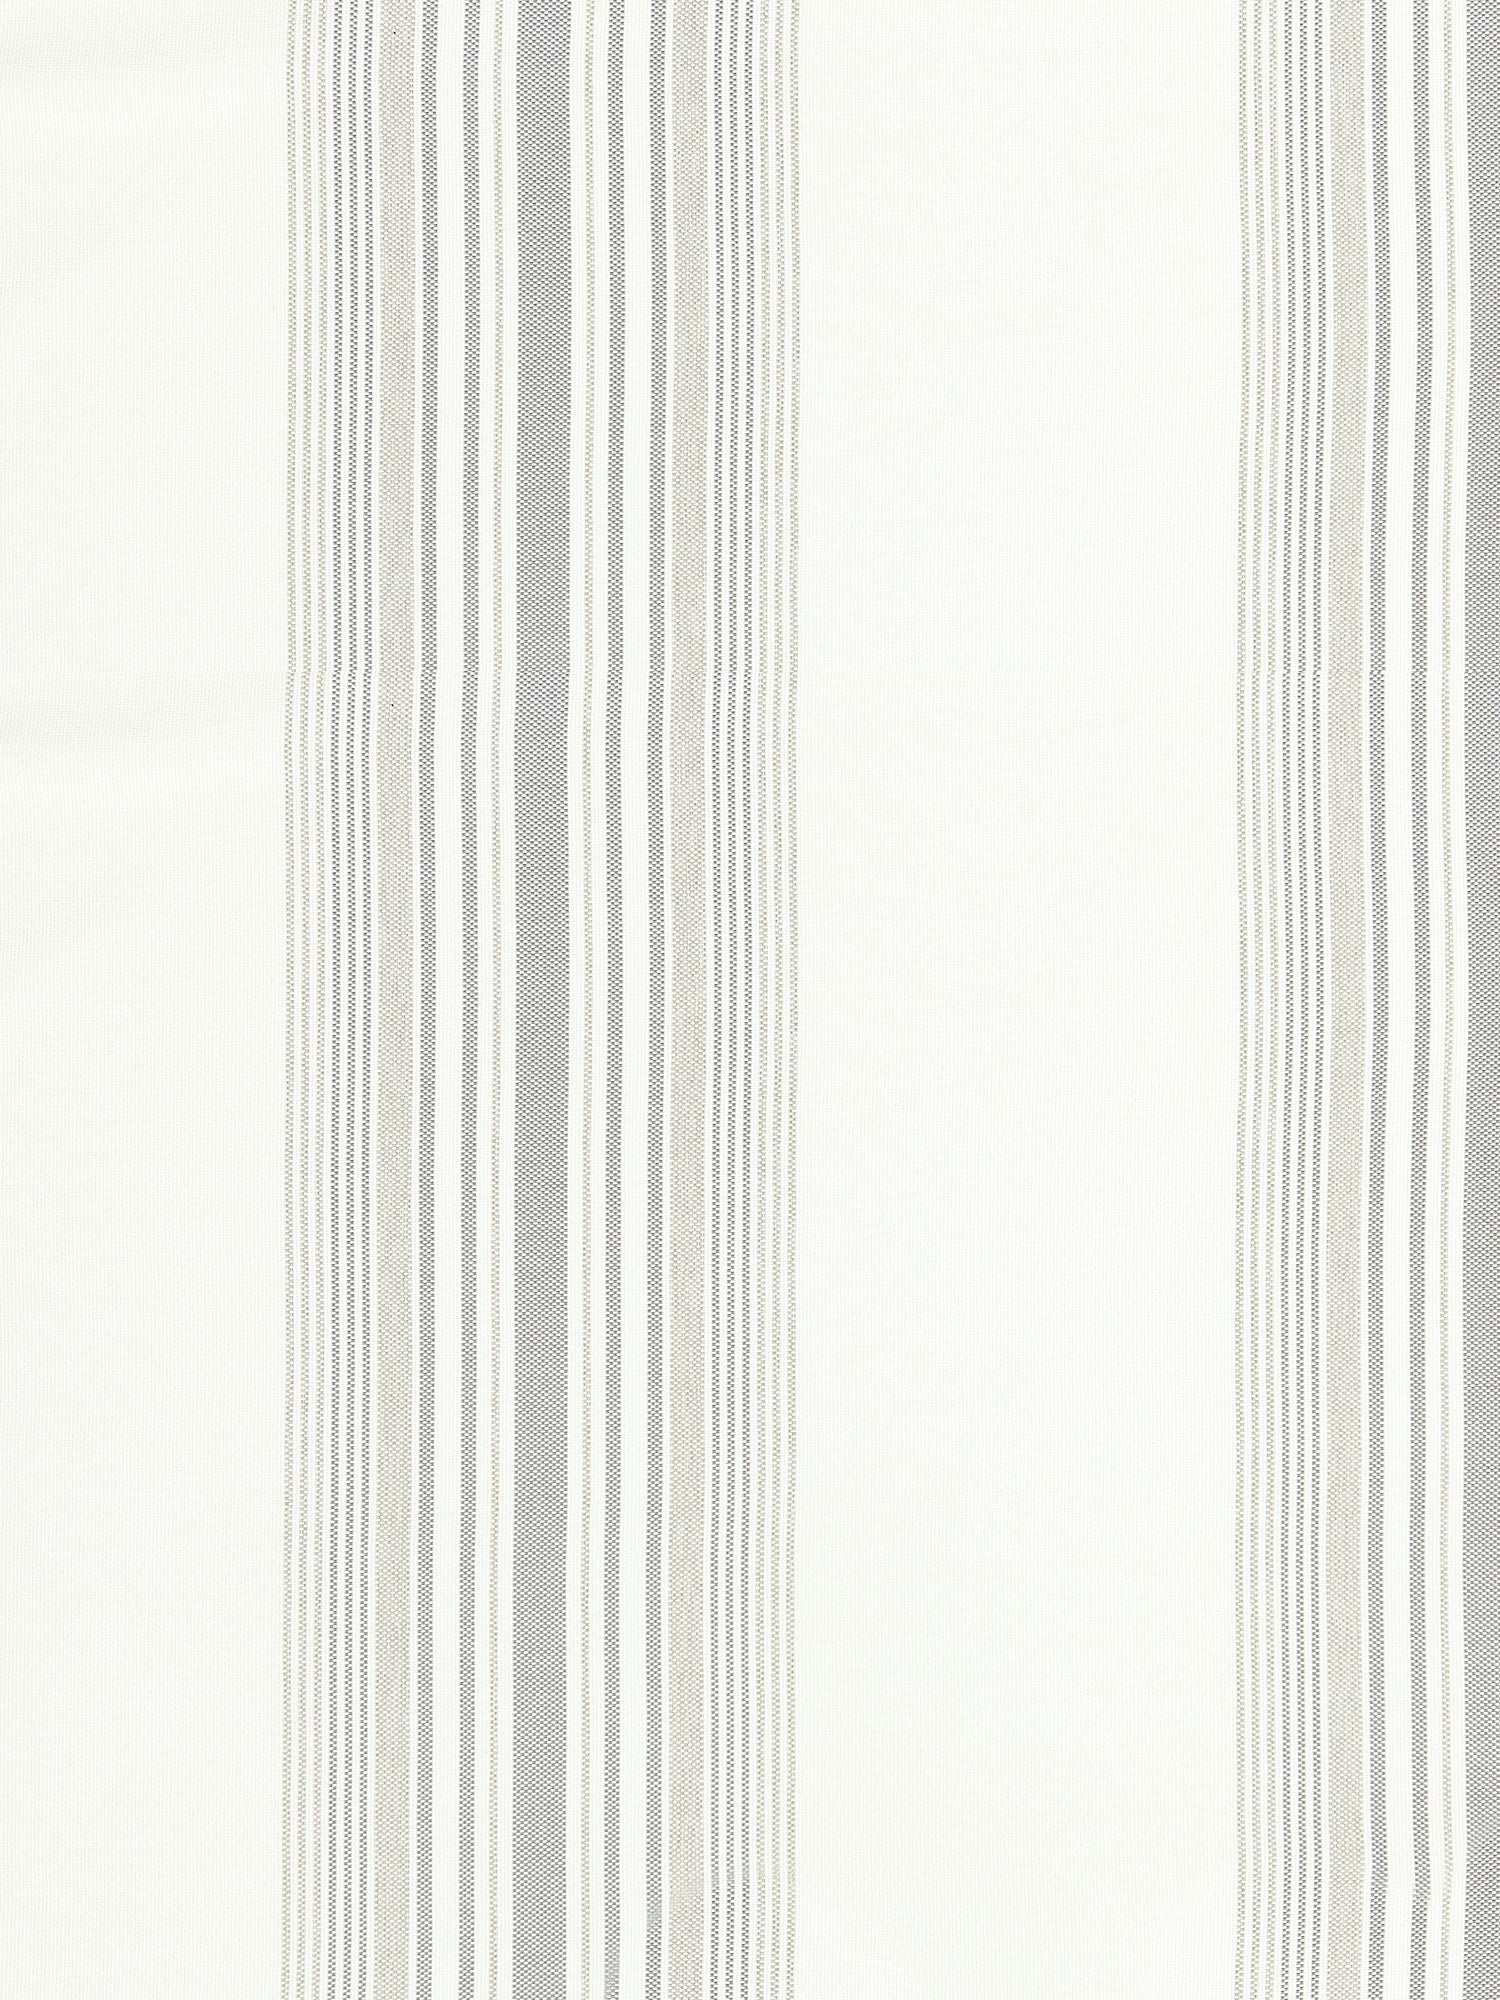 Nautical Stripe fabric in white sand color - pattern number SC 000127069 - by Scalamandre in the Scalamandre Fabrics Book 1 collection